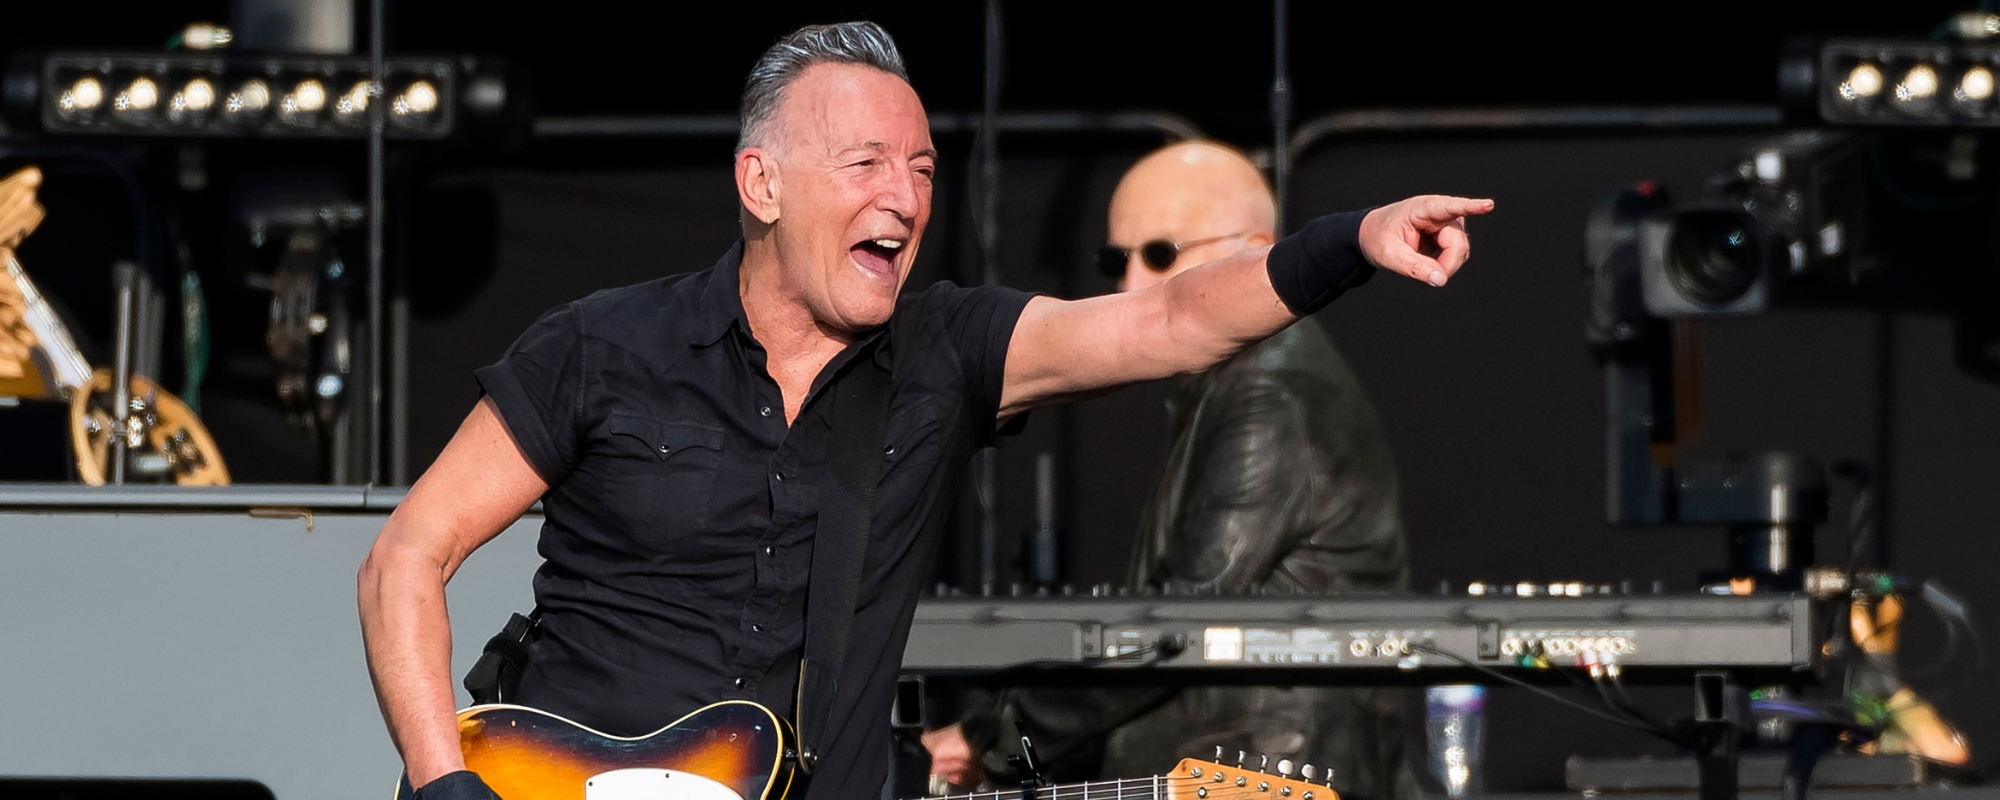 Bruce Springsteen Shares Health Update on New California-Themed Episode of His SiriusXM Radio Show